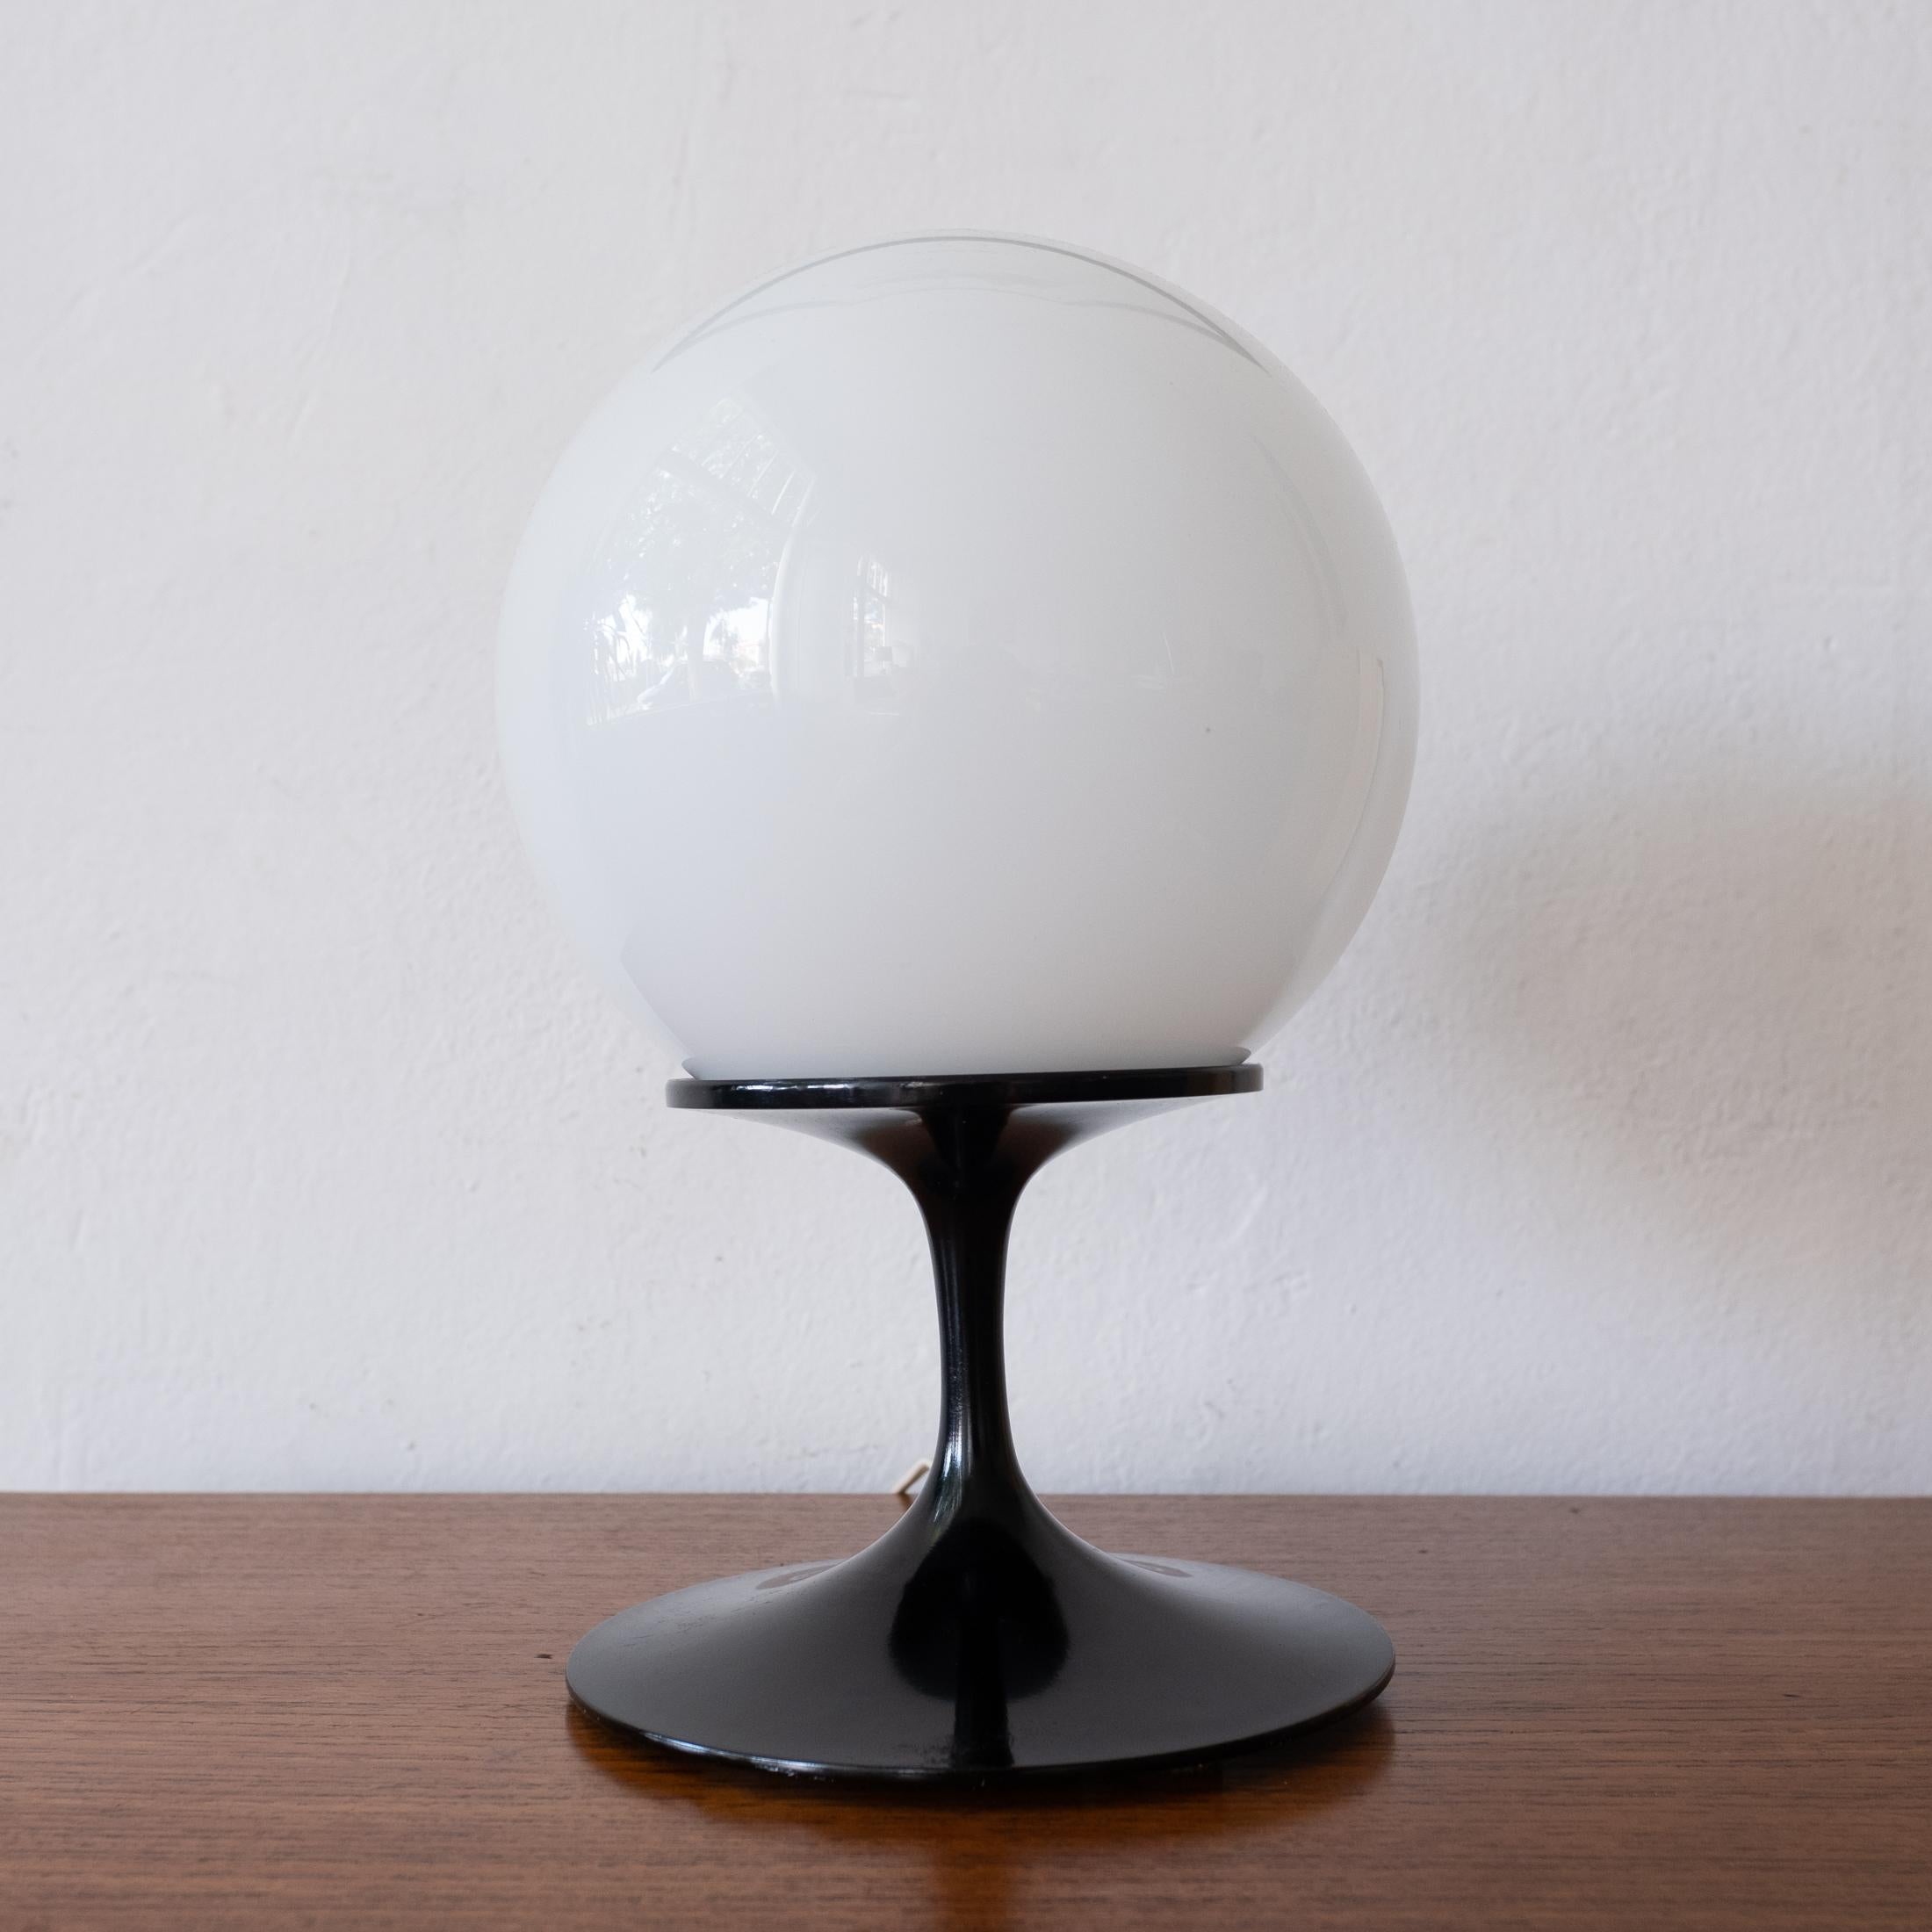 American Midcentury Bill Curry Design Line Table Lamp, 1960s